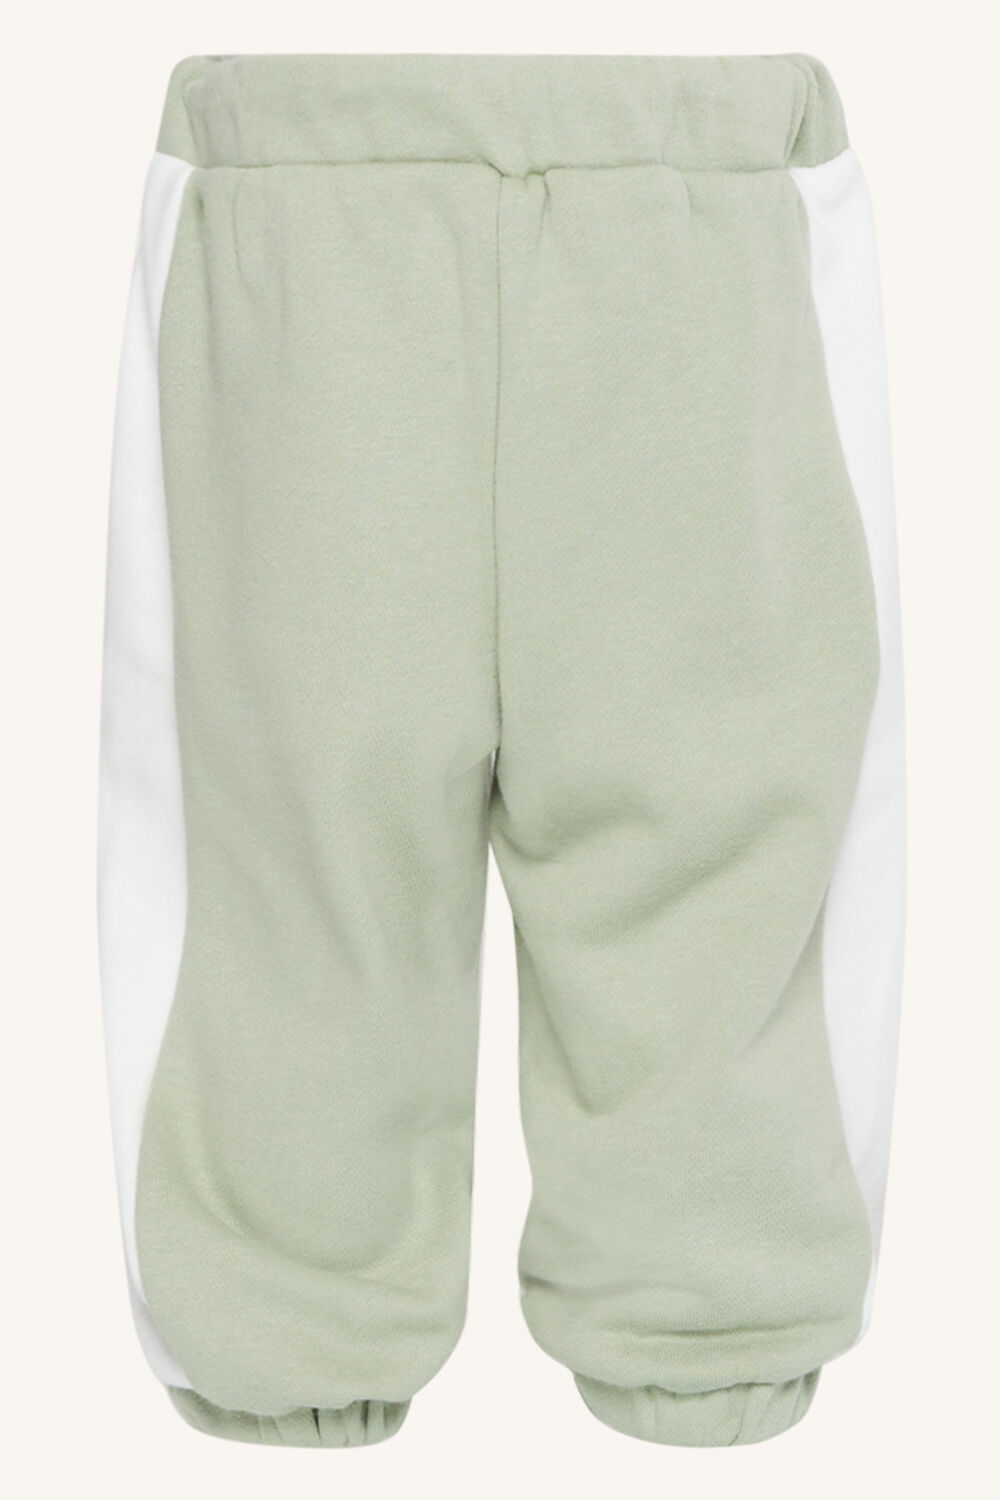 BABY SPLICED SWEAT PANT in colour VINTAGE KHAKI